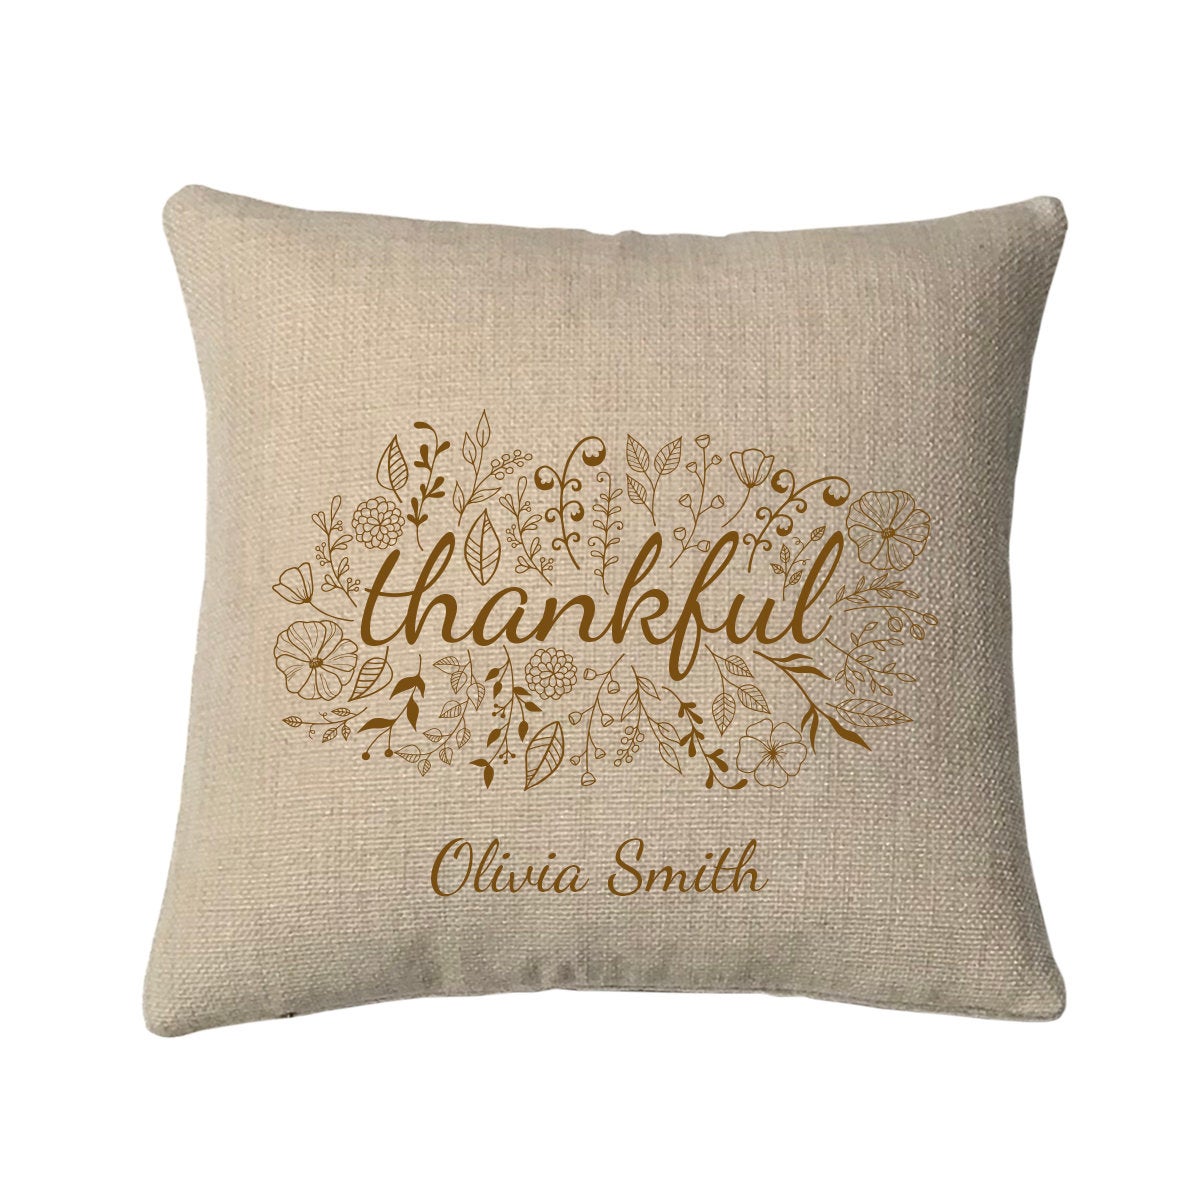 Personalized Thankful Mini Throw Pillow Measures 9.5 Inches X 9.5 Inches (Insert is included) Complete Very Small Throw Pillow